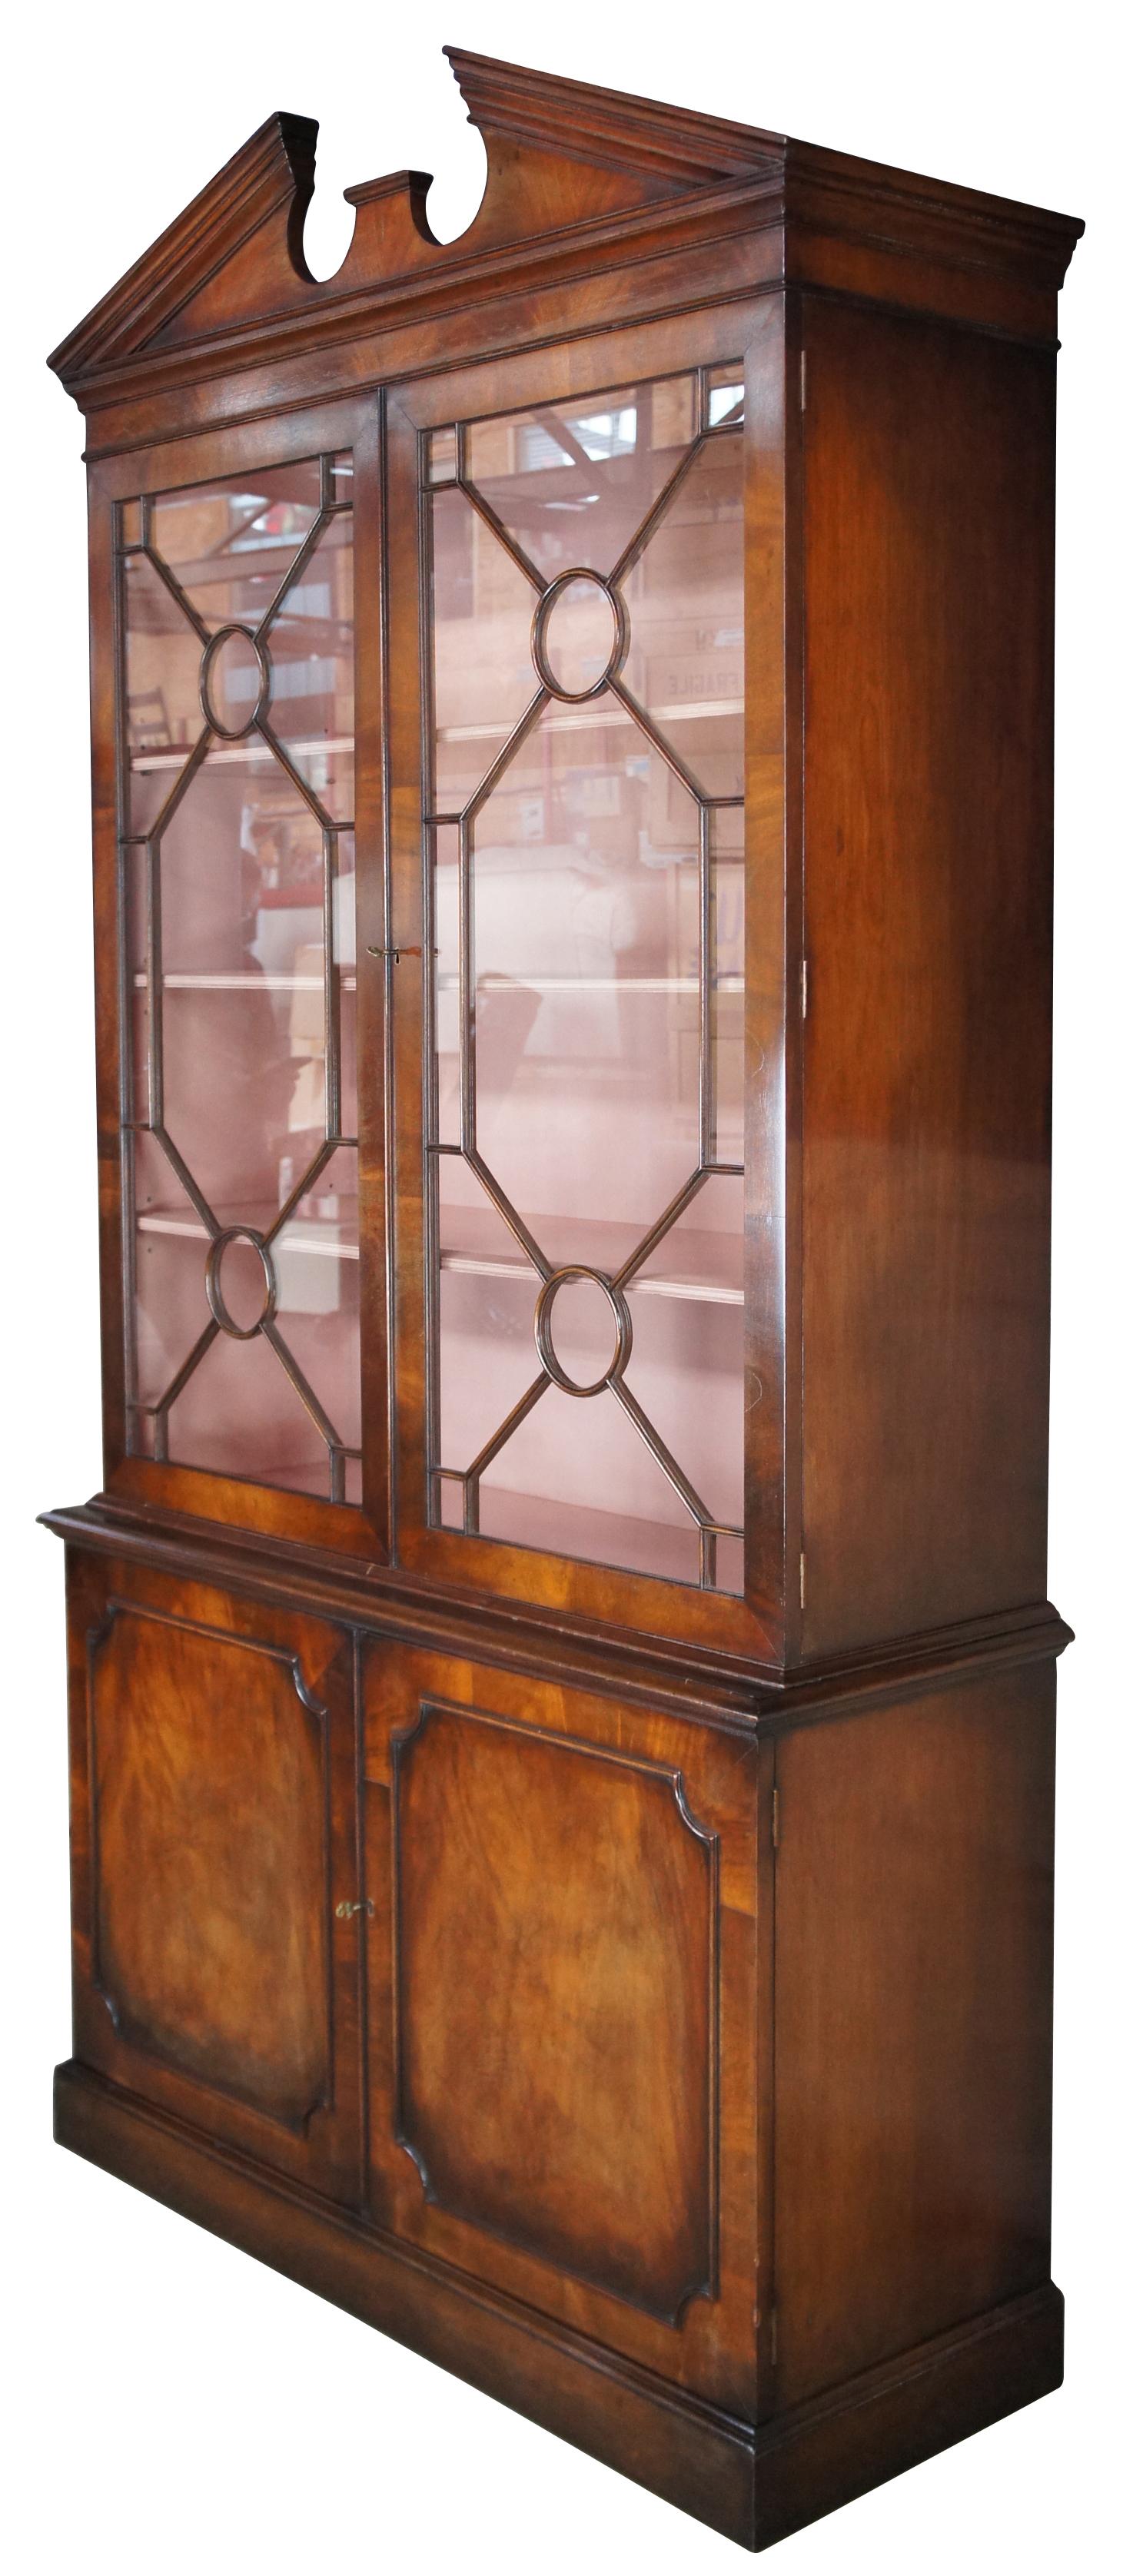 Smith & Watson Georgian bookcase or display cabinet, circa last quarter 20th century. Made from flamed mahogany with a larger upper display section featuring applied fretwork over lower concealed storage. Crown fashions a broken arch pediment.